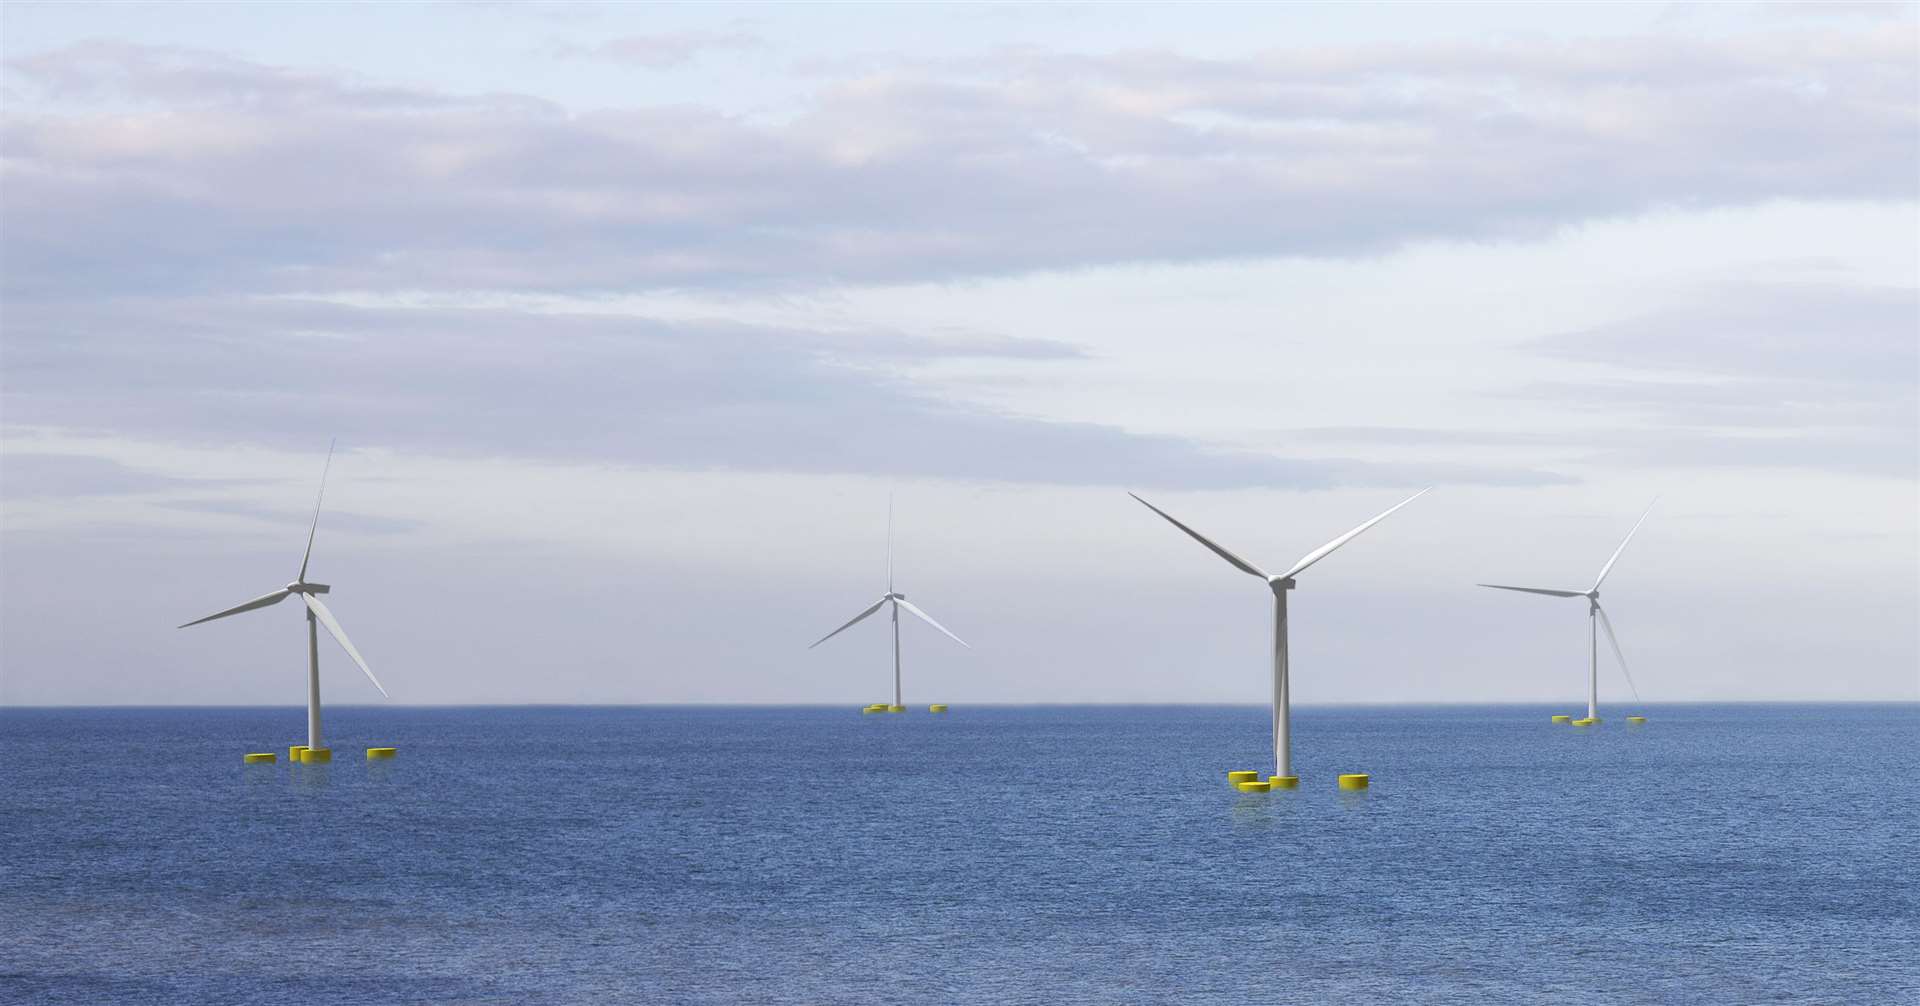 An illustration of how the Pentland Offshore Wind Farm could look.